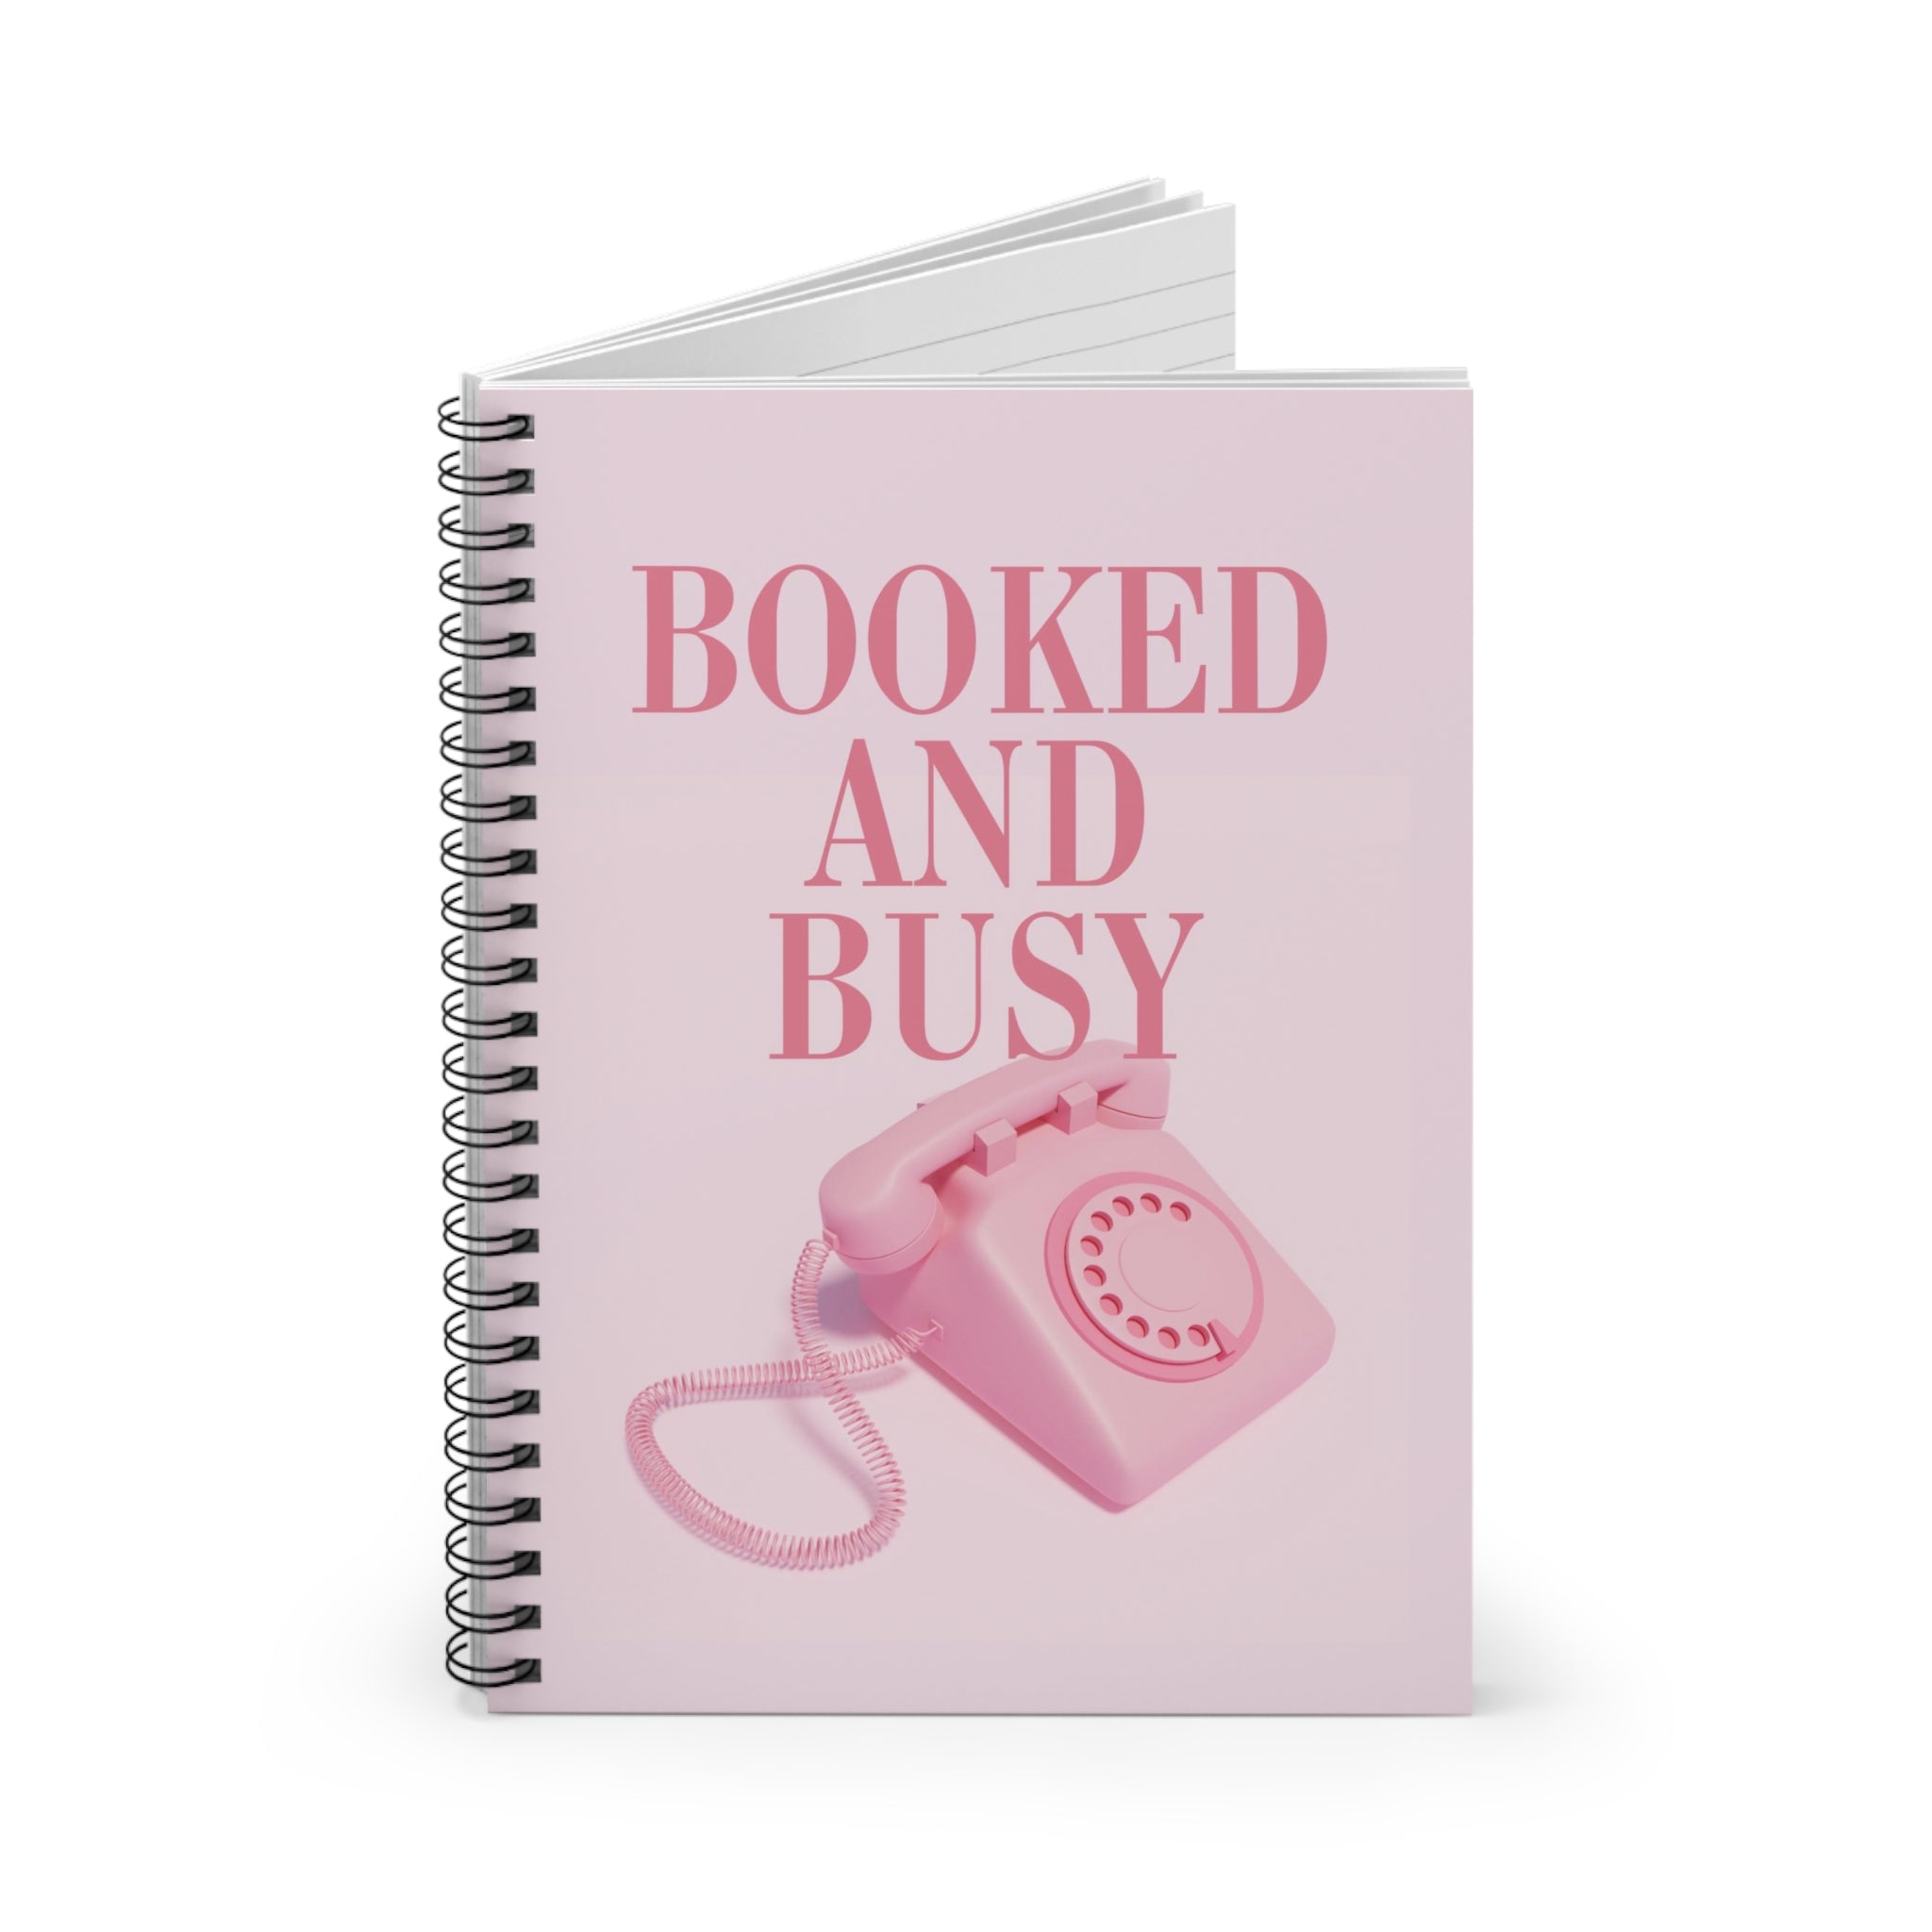 Booked and Busy Spiral Notebook By GS Print Shoppe